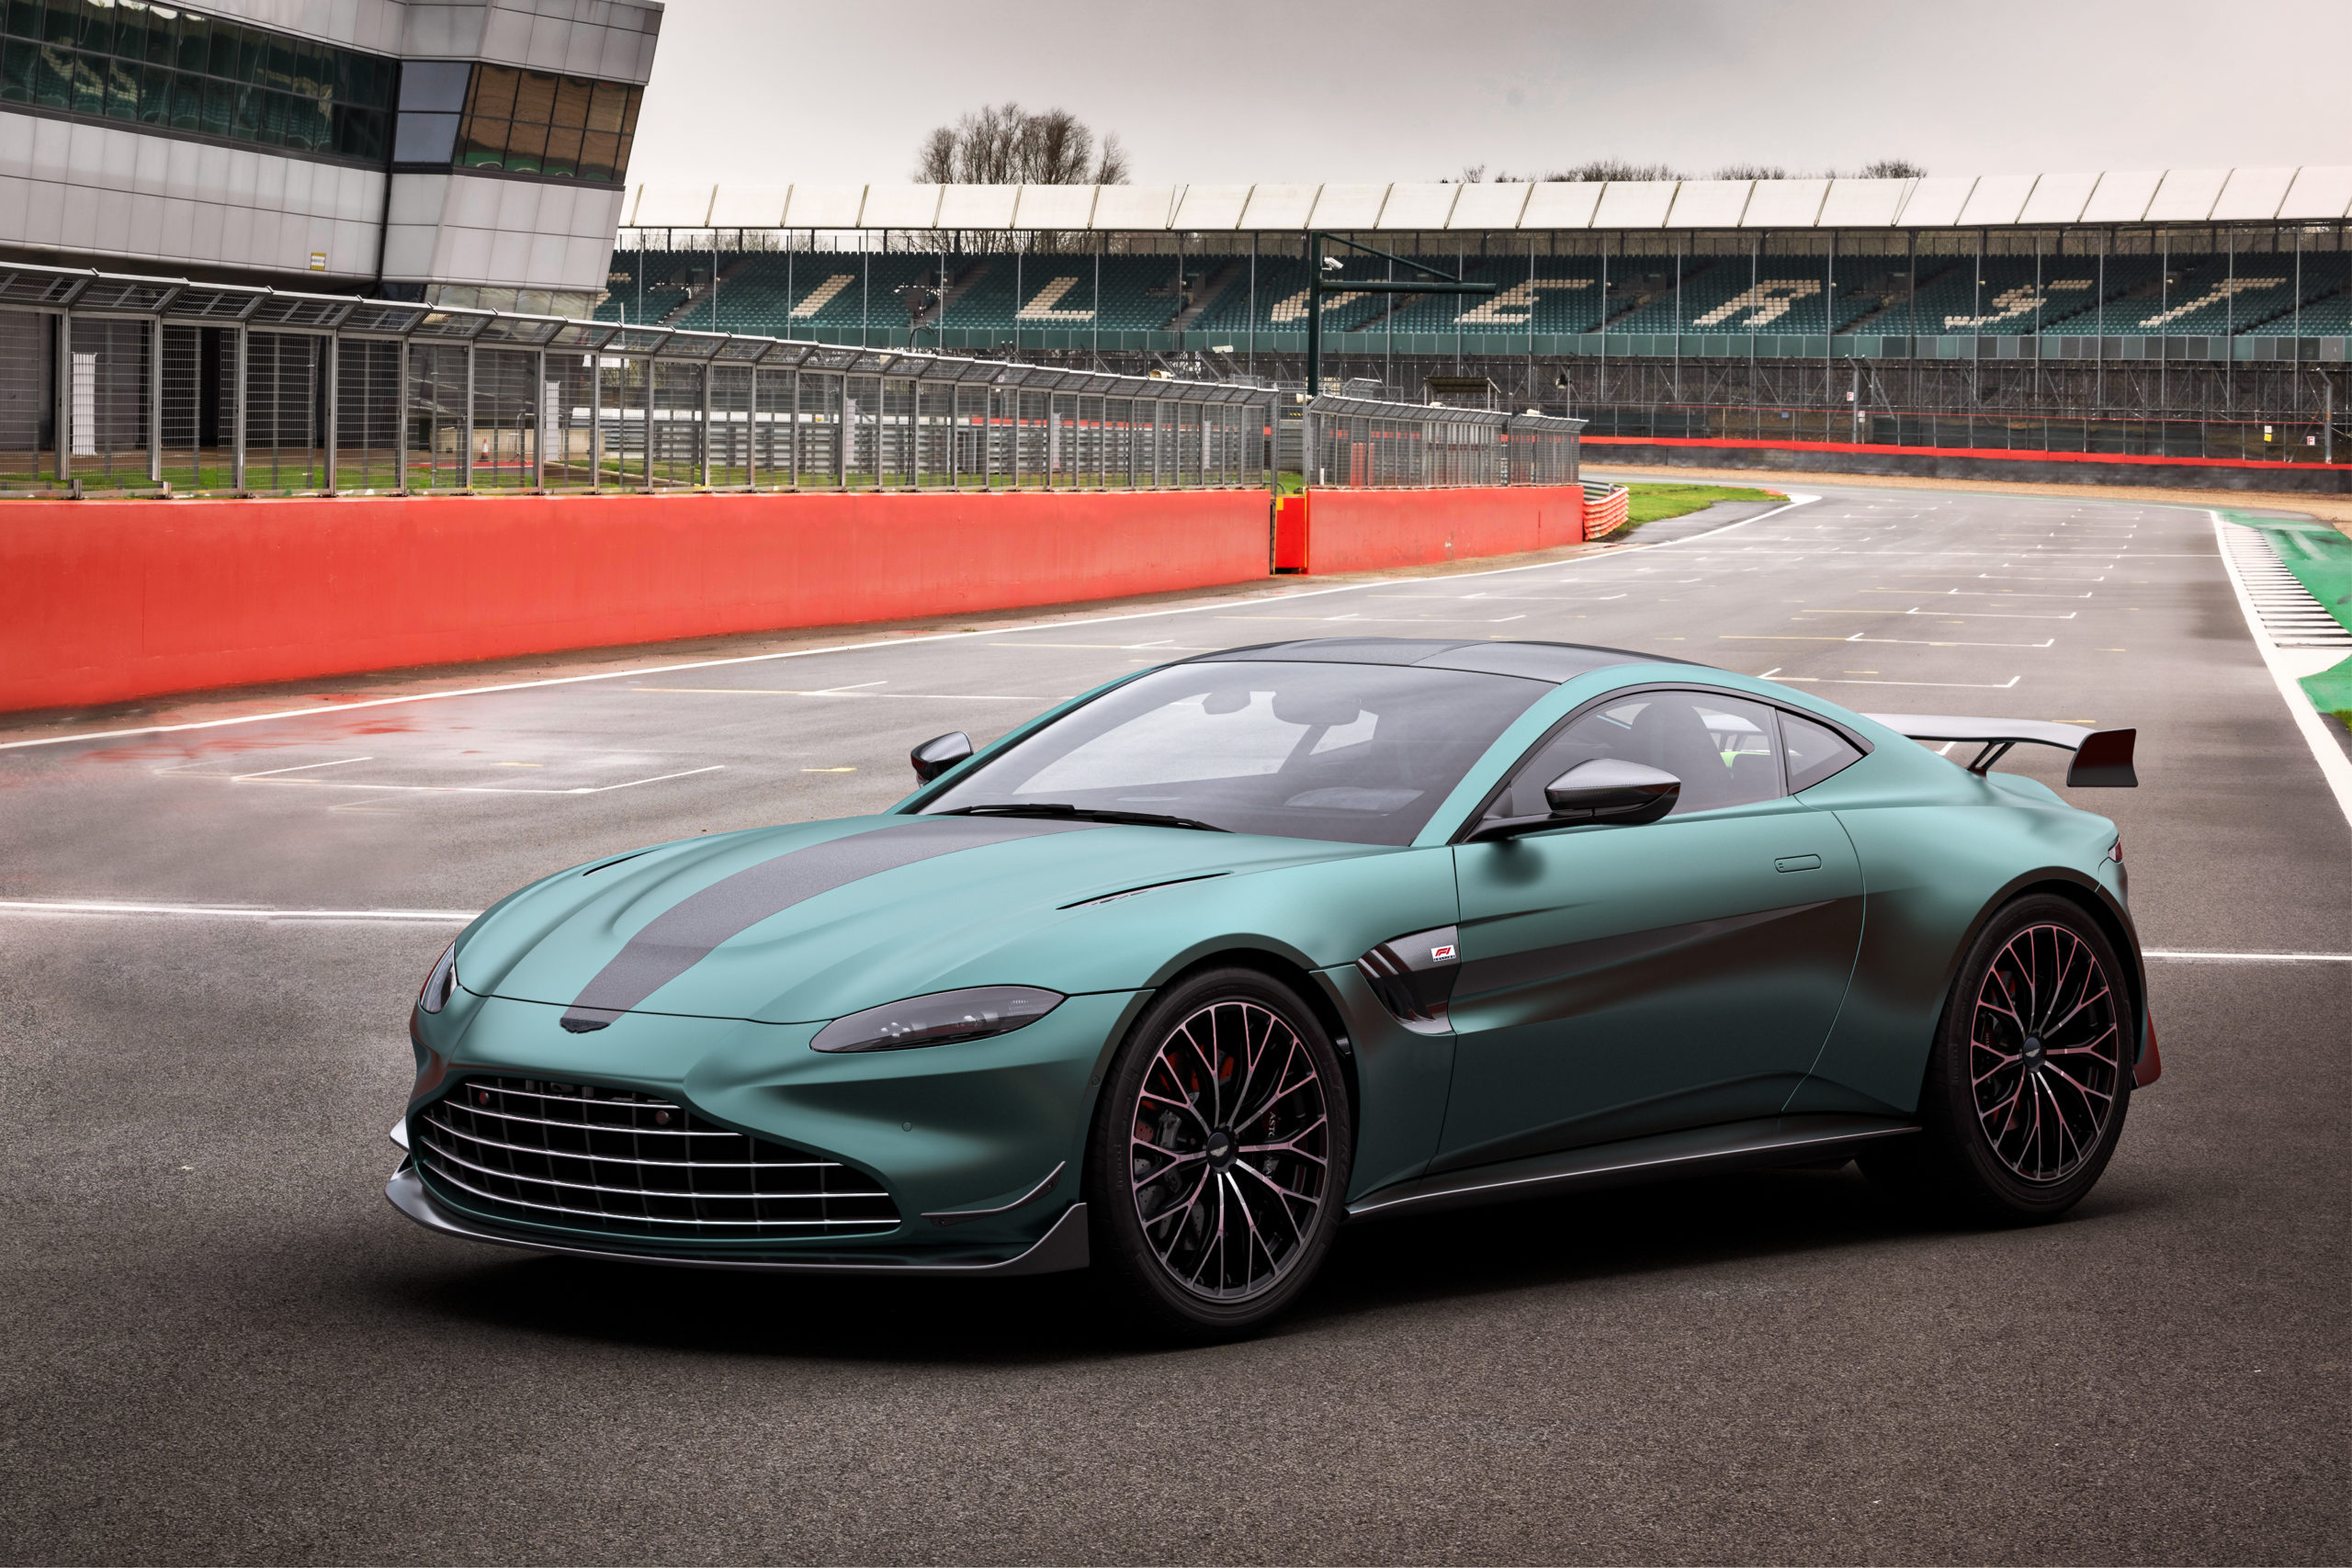 2021 Aston Martin Vantage F1 Edition Breaks Cover! - The Indian Wire